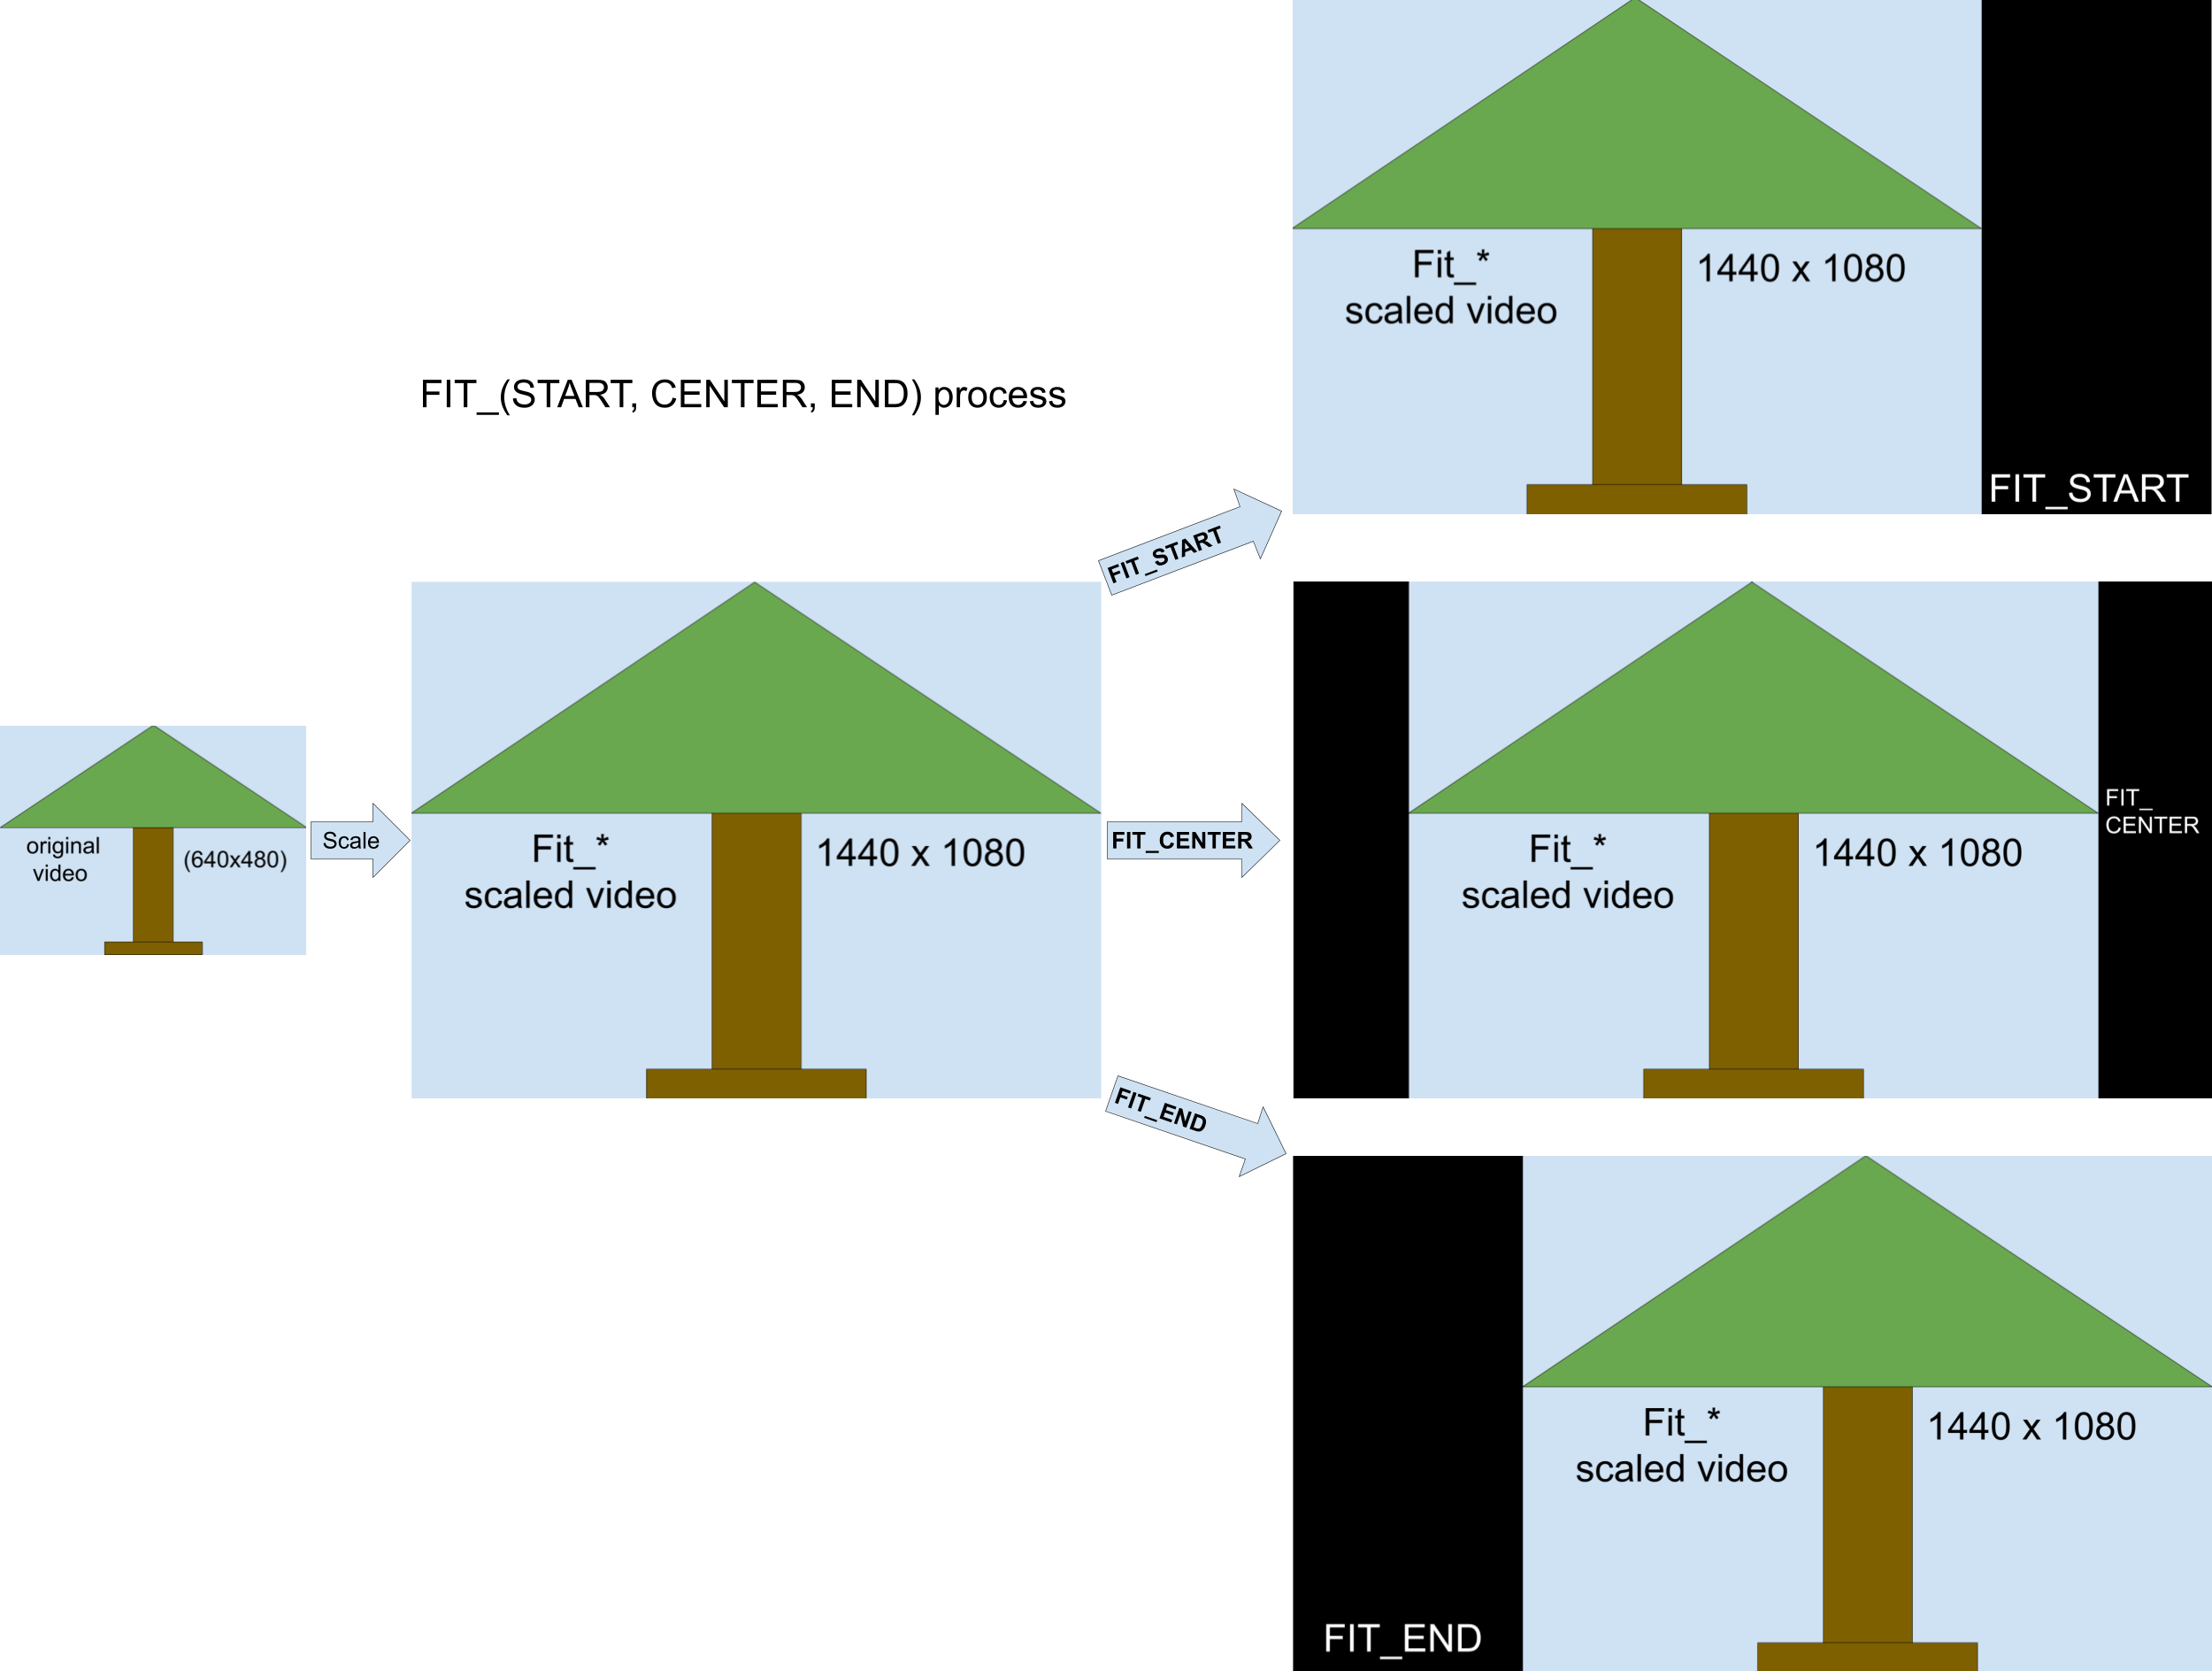 Image showing the FIT_START, FIT_CENTER, and FIT_END scaling process